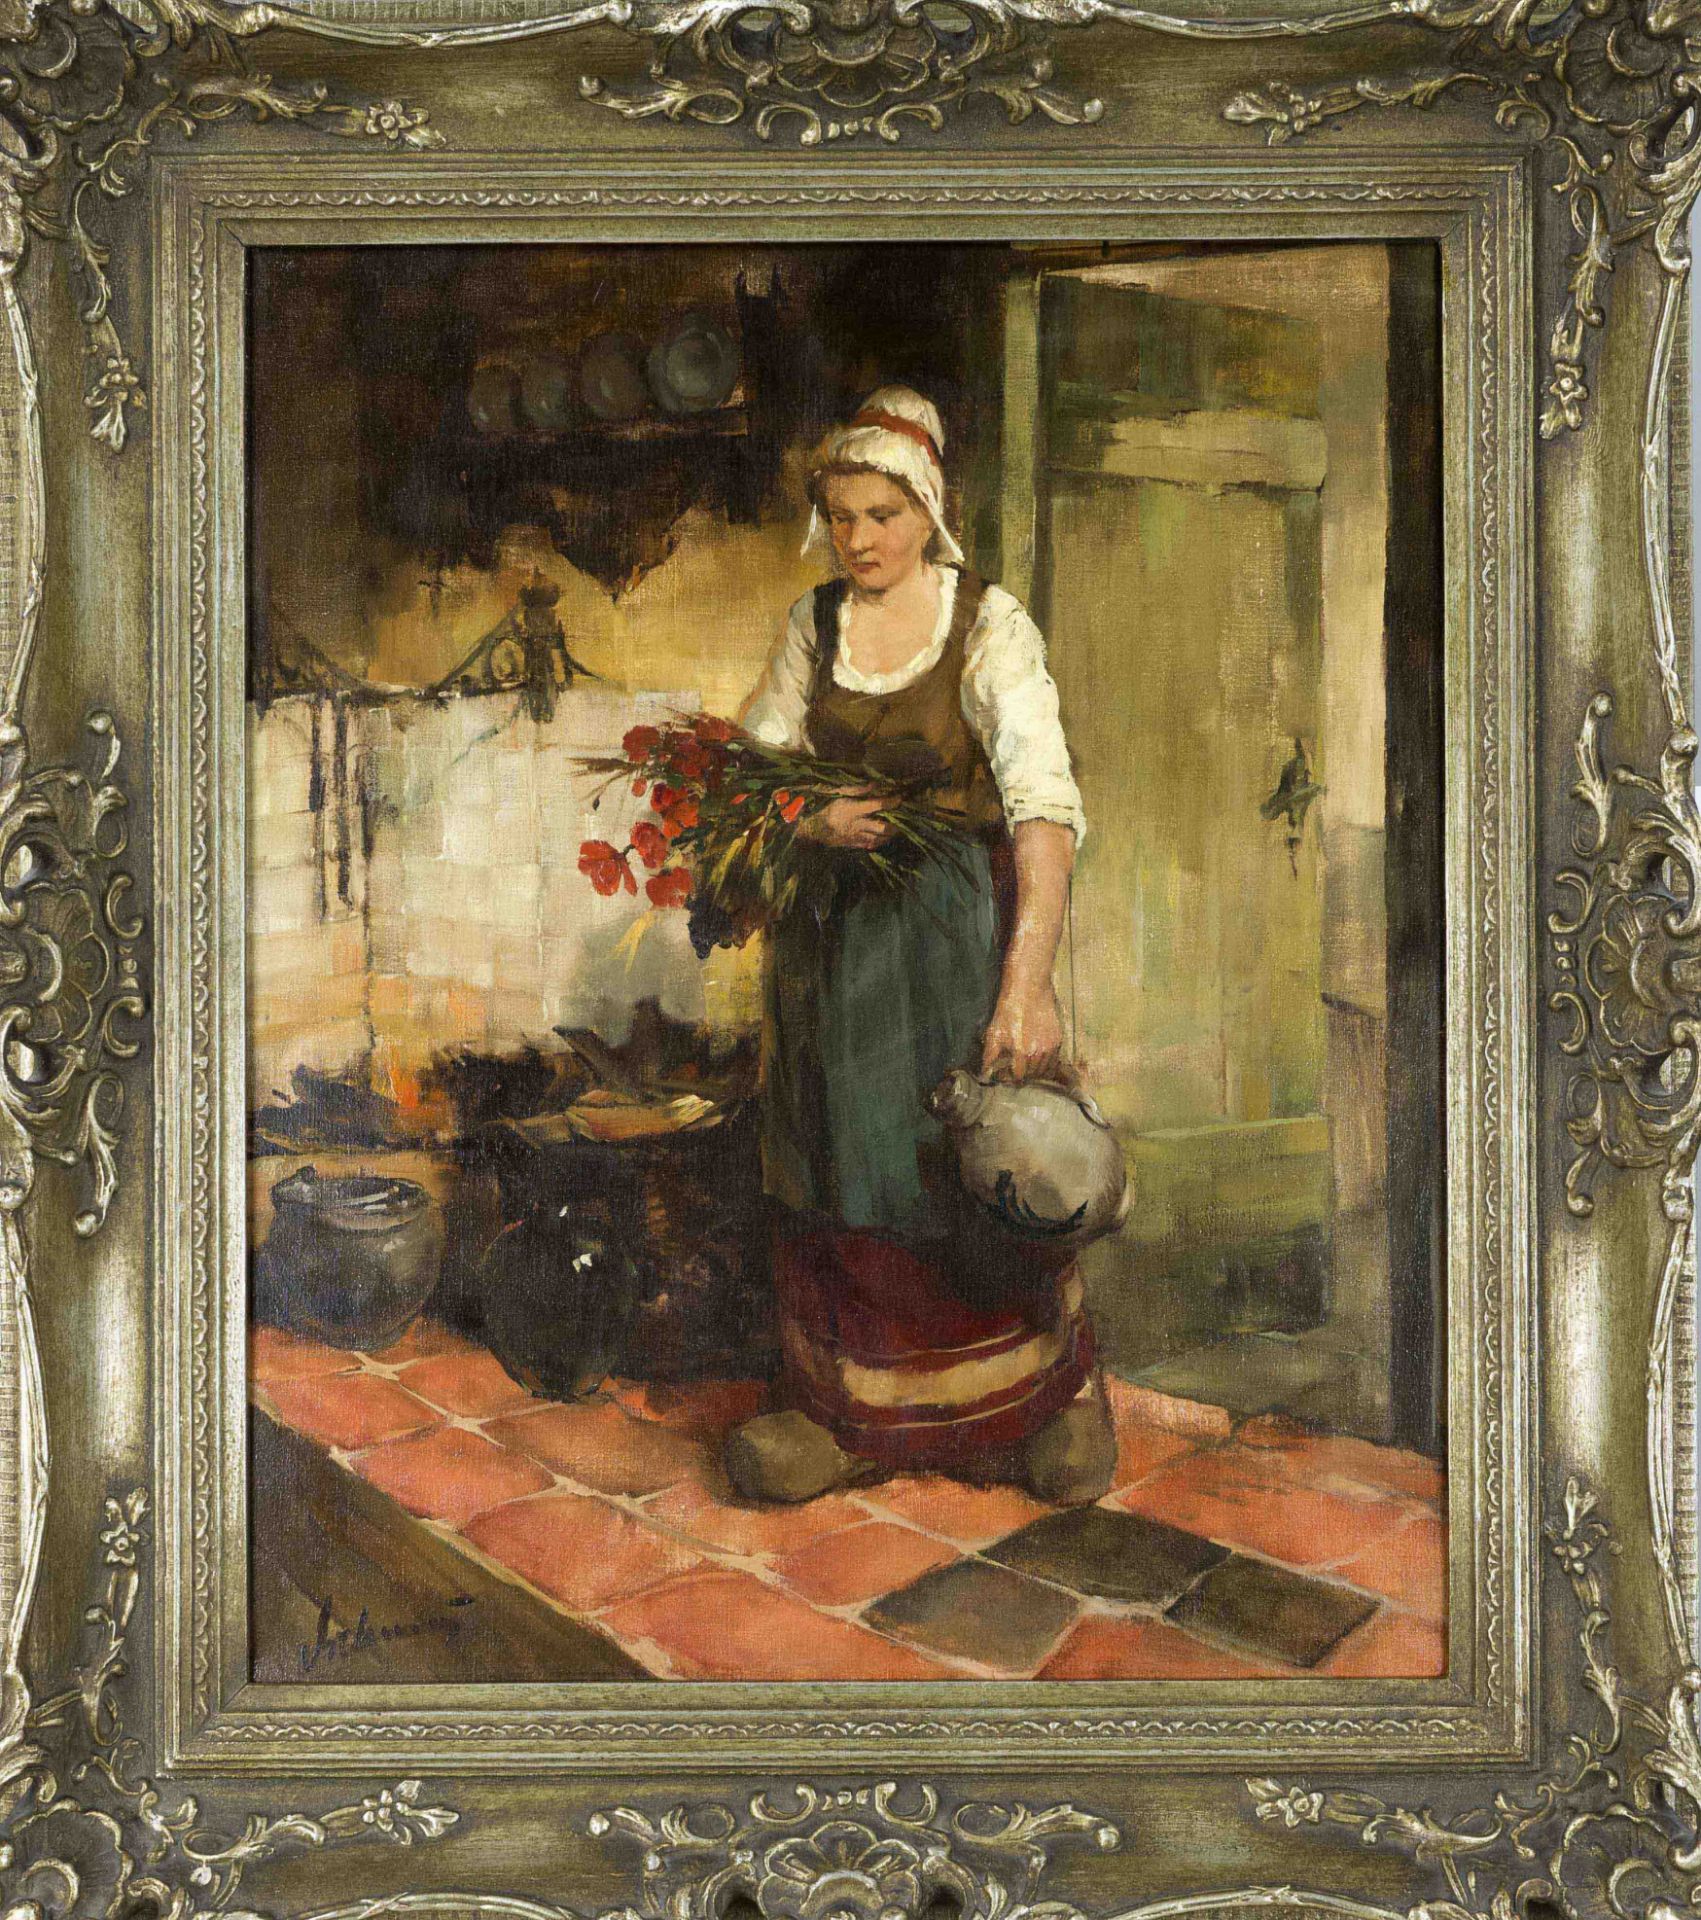 Anonymous genre painter mid-20th century, Woman with Jug, oil on canvas, indistinctly signed lower